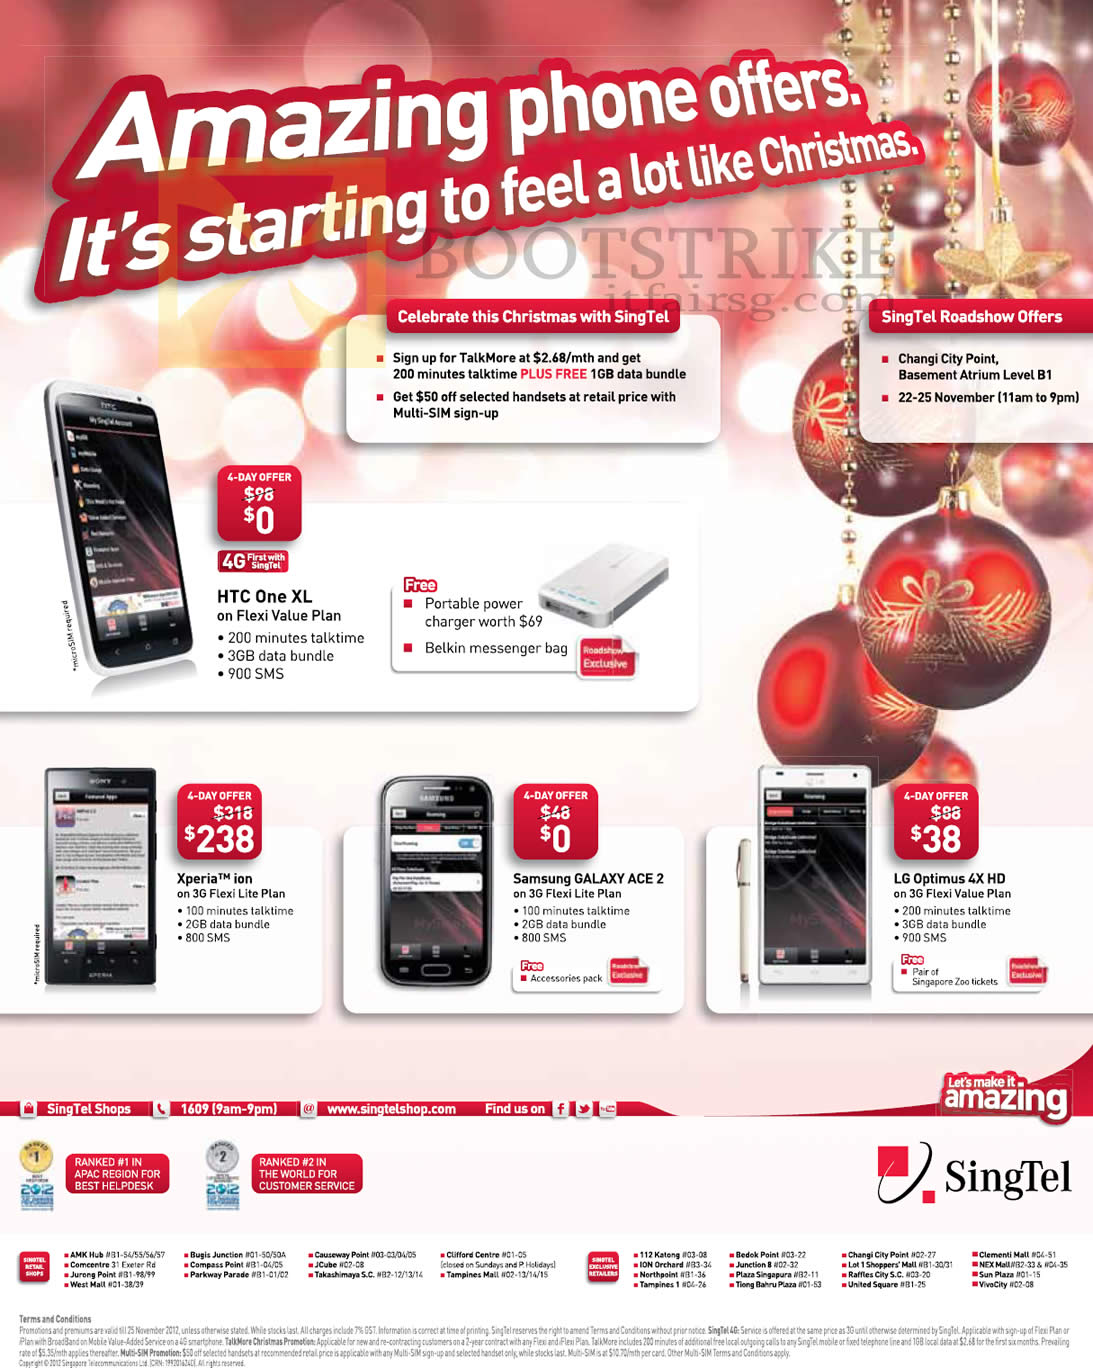 SITEX 2012 price list image brochure of Singtel Mobile Phones HTC One XL, Changi City Point, Sony Xperia Ion, Samsung Galaxy Ace 2, LG Optimus 4X HD